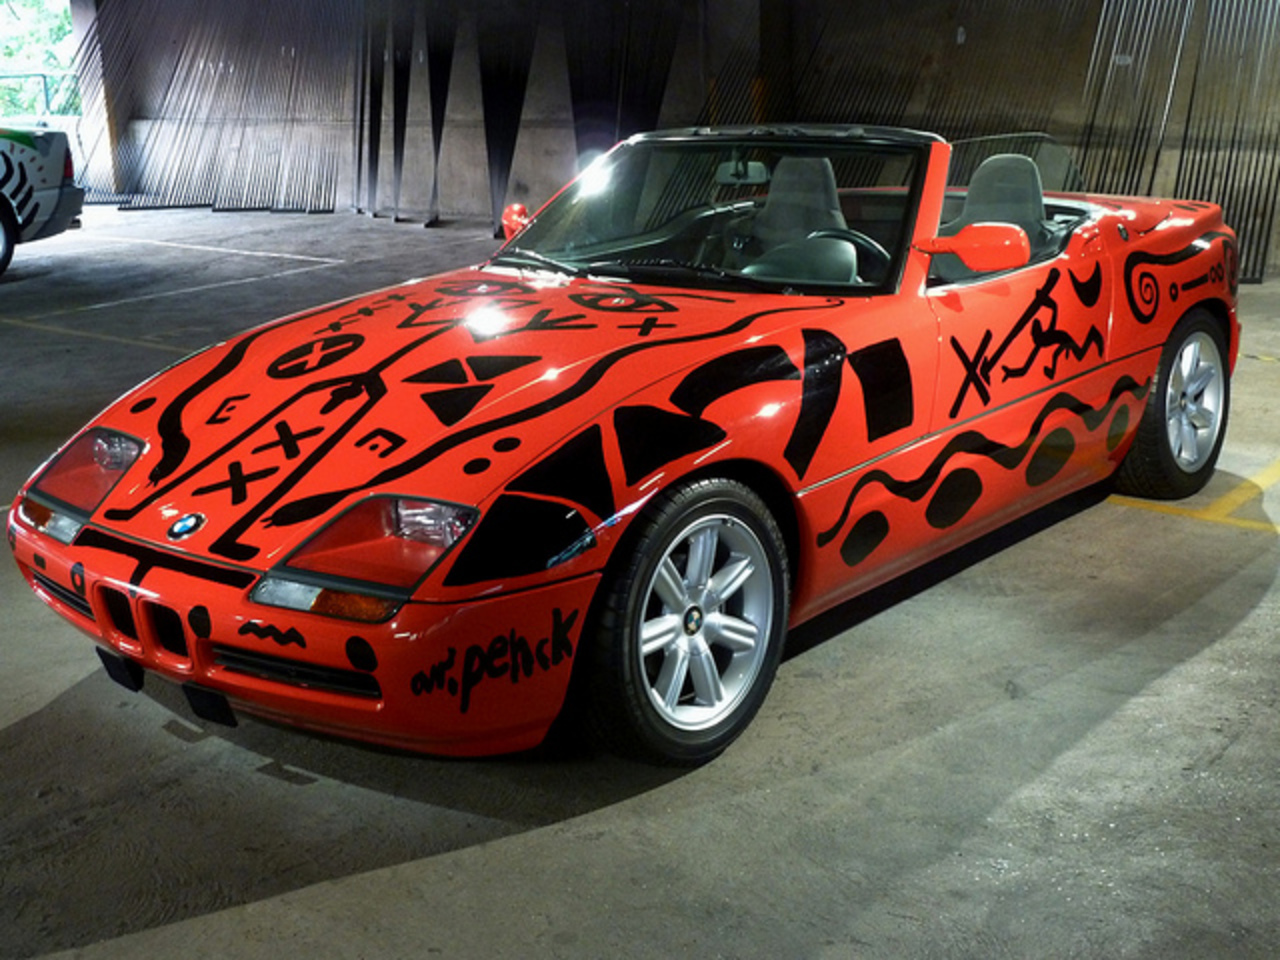 Bmw Z1 by A.R. Penck 01 | Flickr - Photo Sharing!